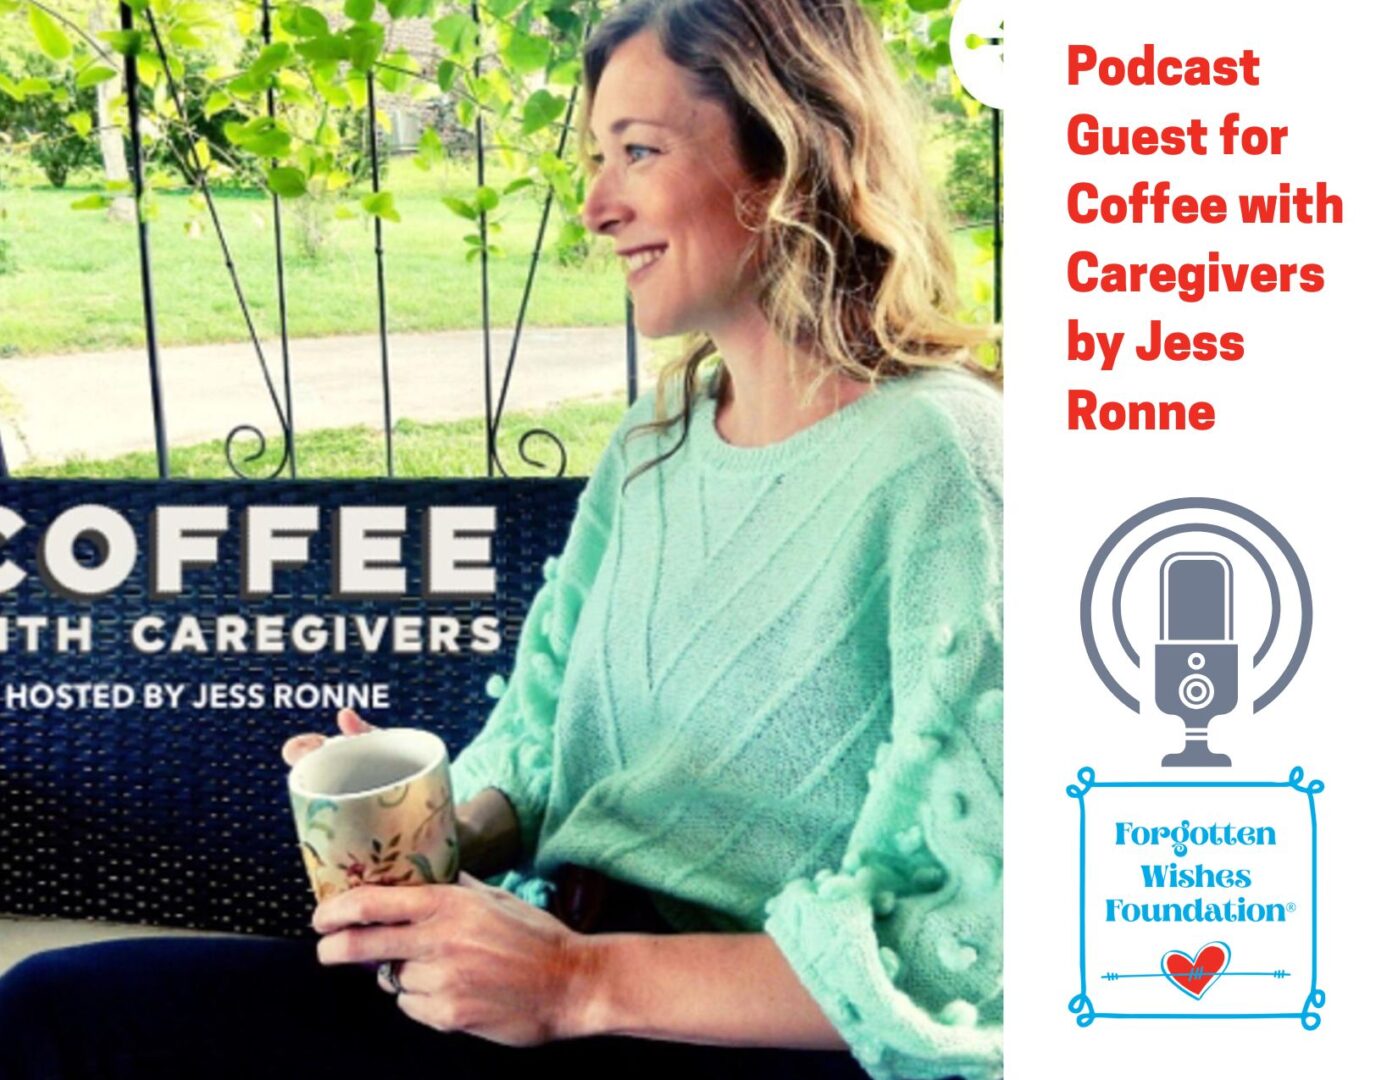 Jess Ronne is a woman sitting drinking a coffee. She is the hostess of the podcast Coffee for Caregivers.